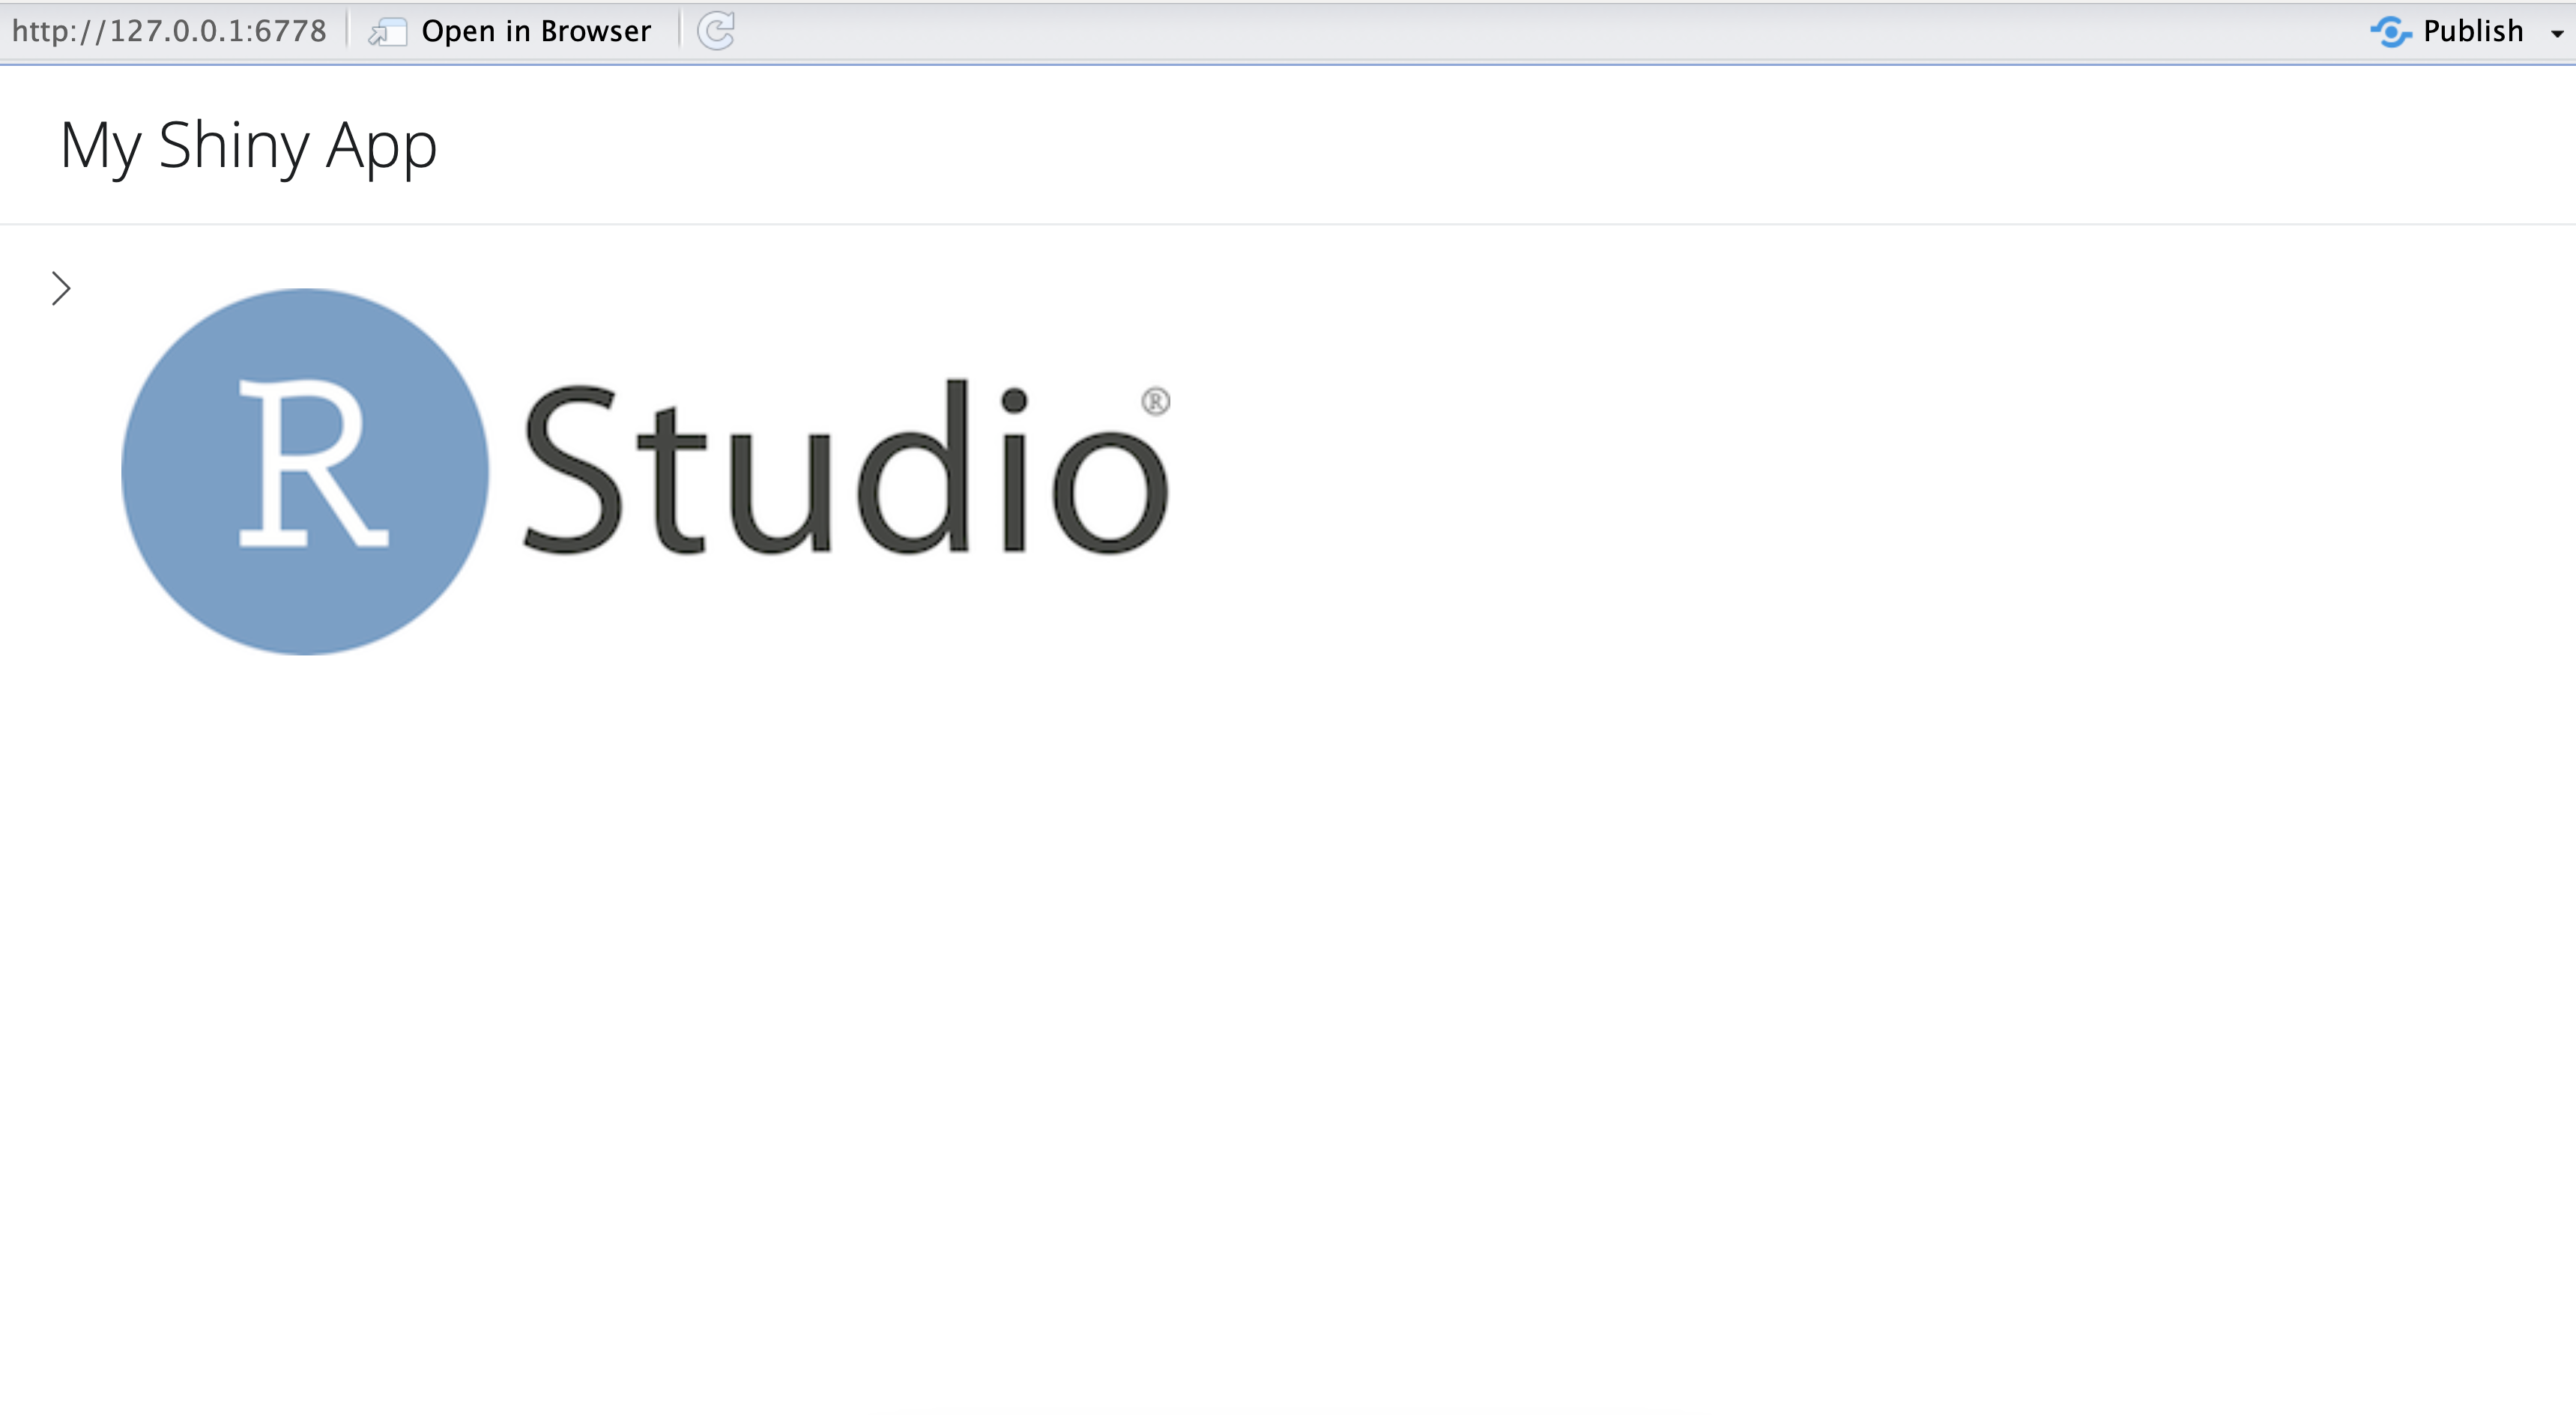 The RStudio log in a Shiny app